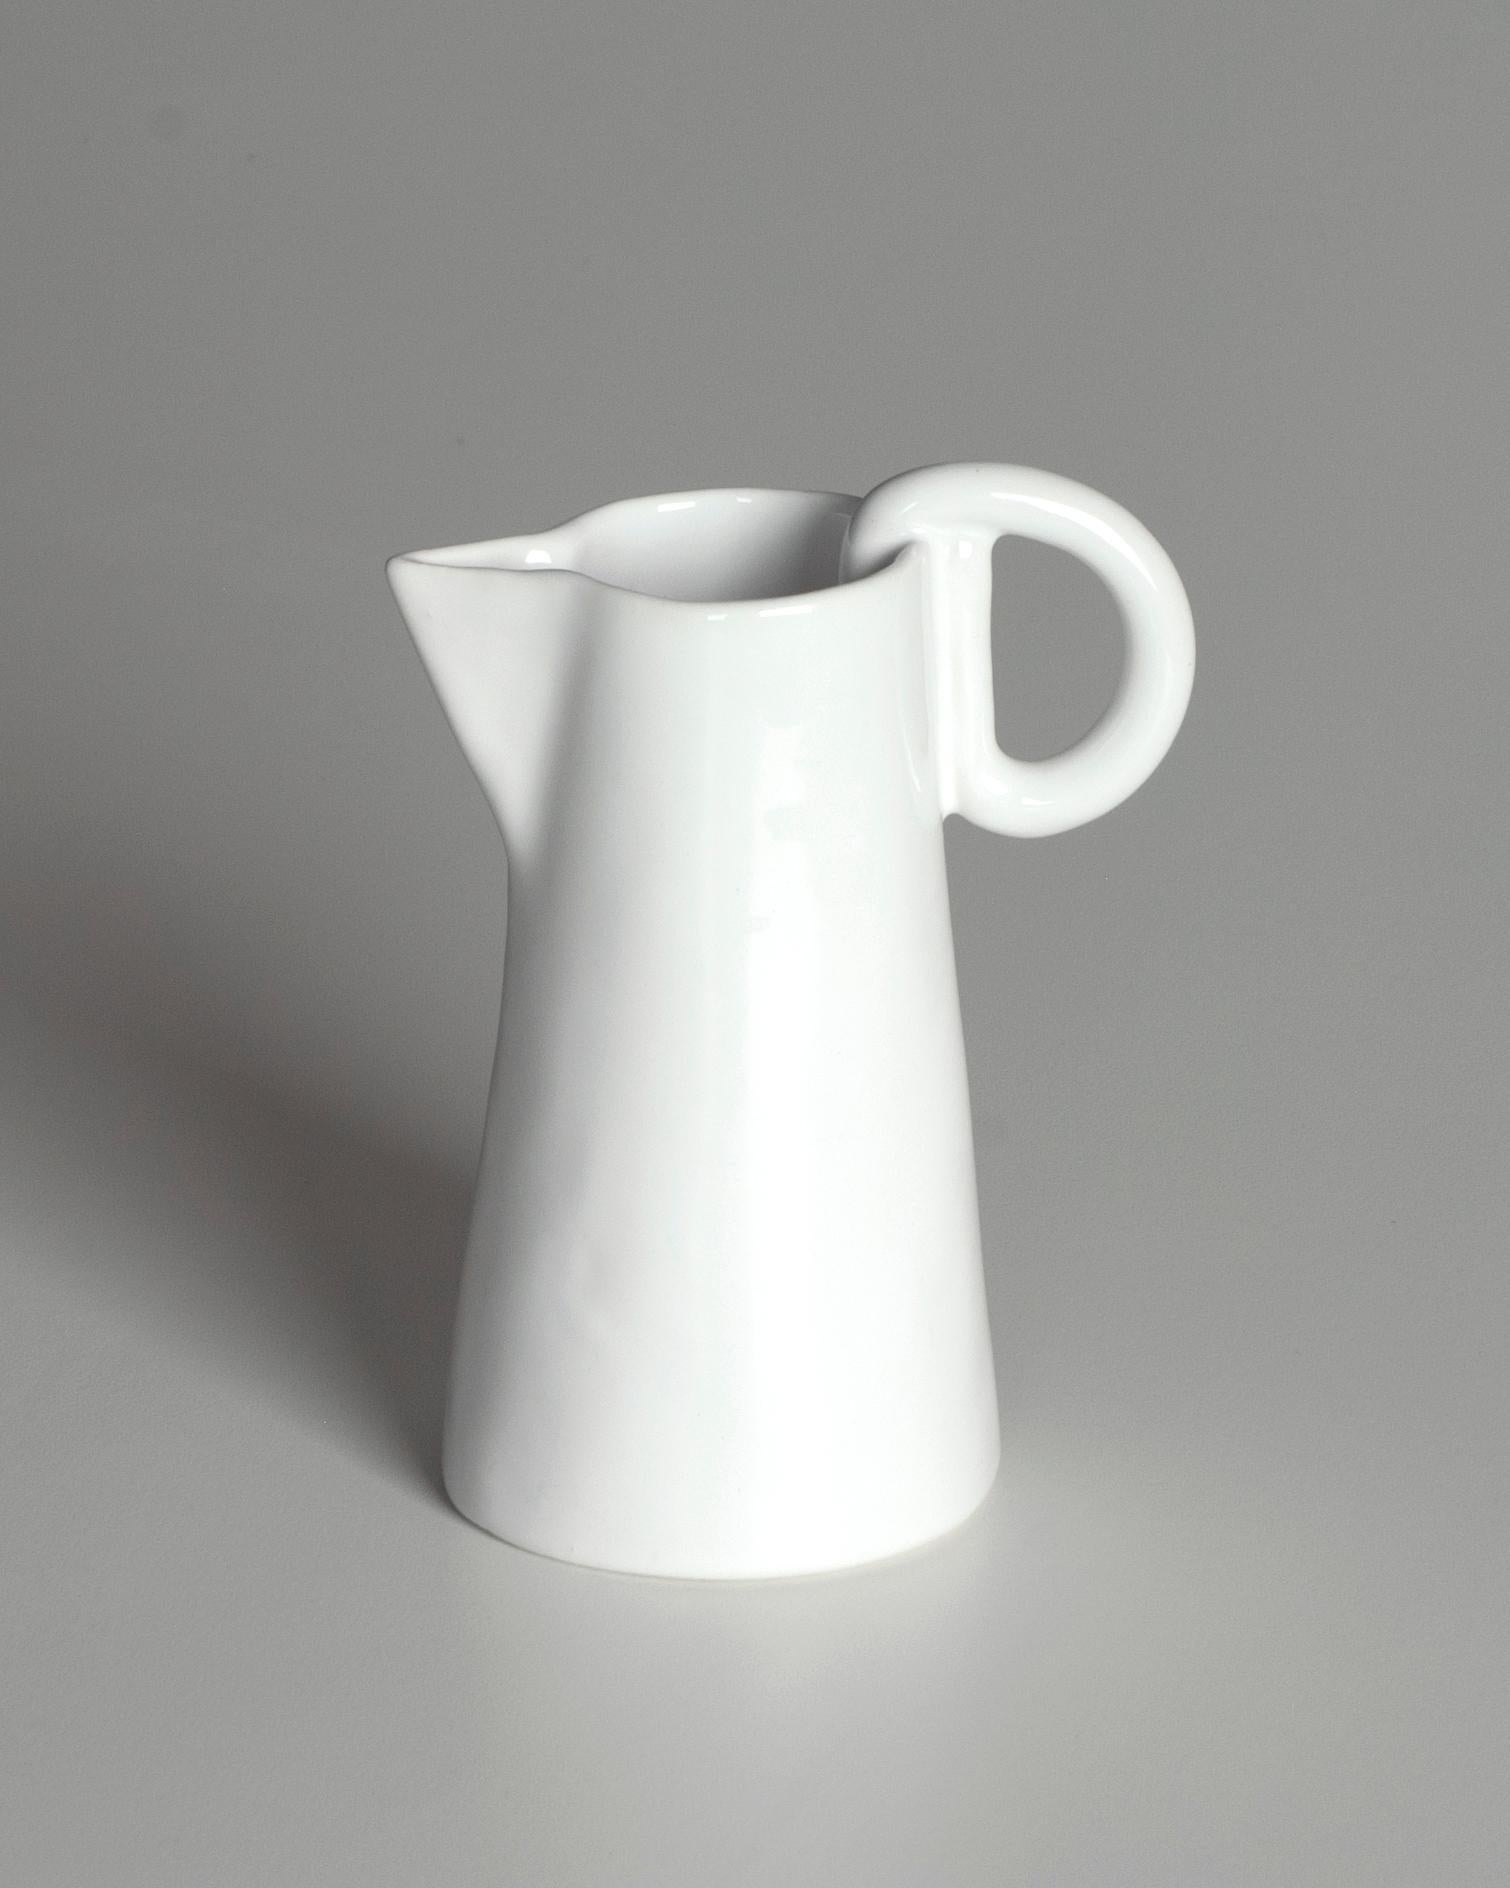 Delicate white ceramic jug, entirely handcrafted. The enameling, applied using the dipping technique, gives the jug a simple elegance and unique character.